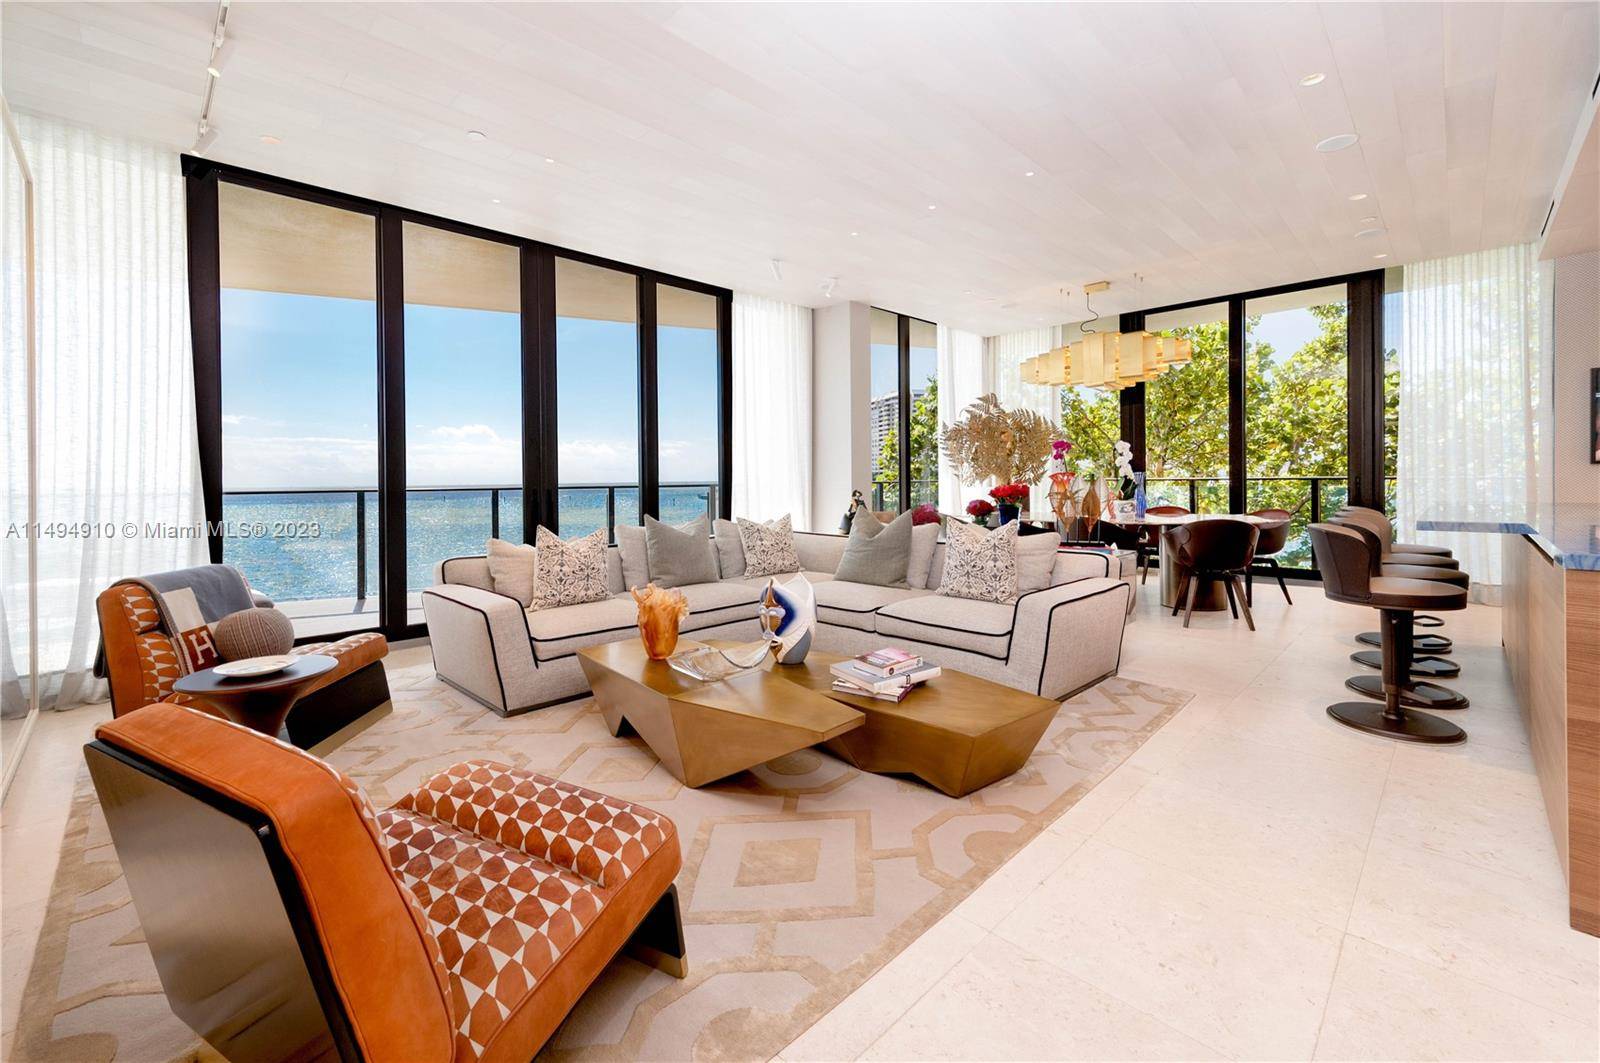 Discover the epitome of refined living in this extraordinary 4 Bedroom luxury apartment at The Fairchild.